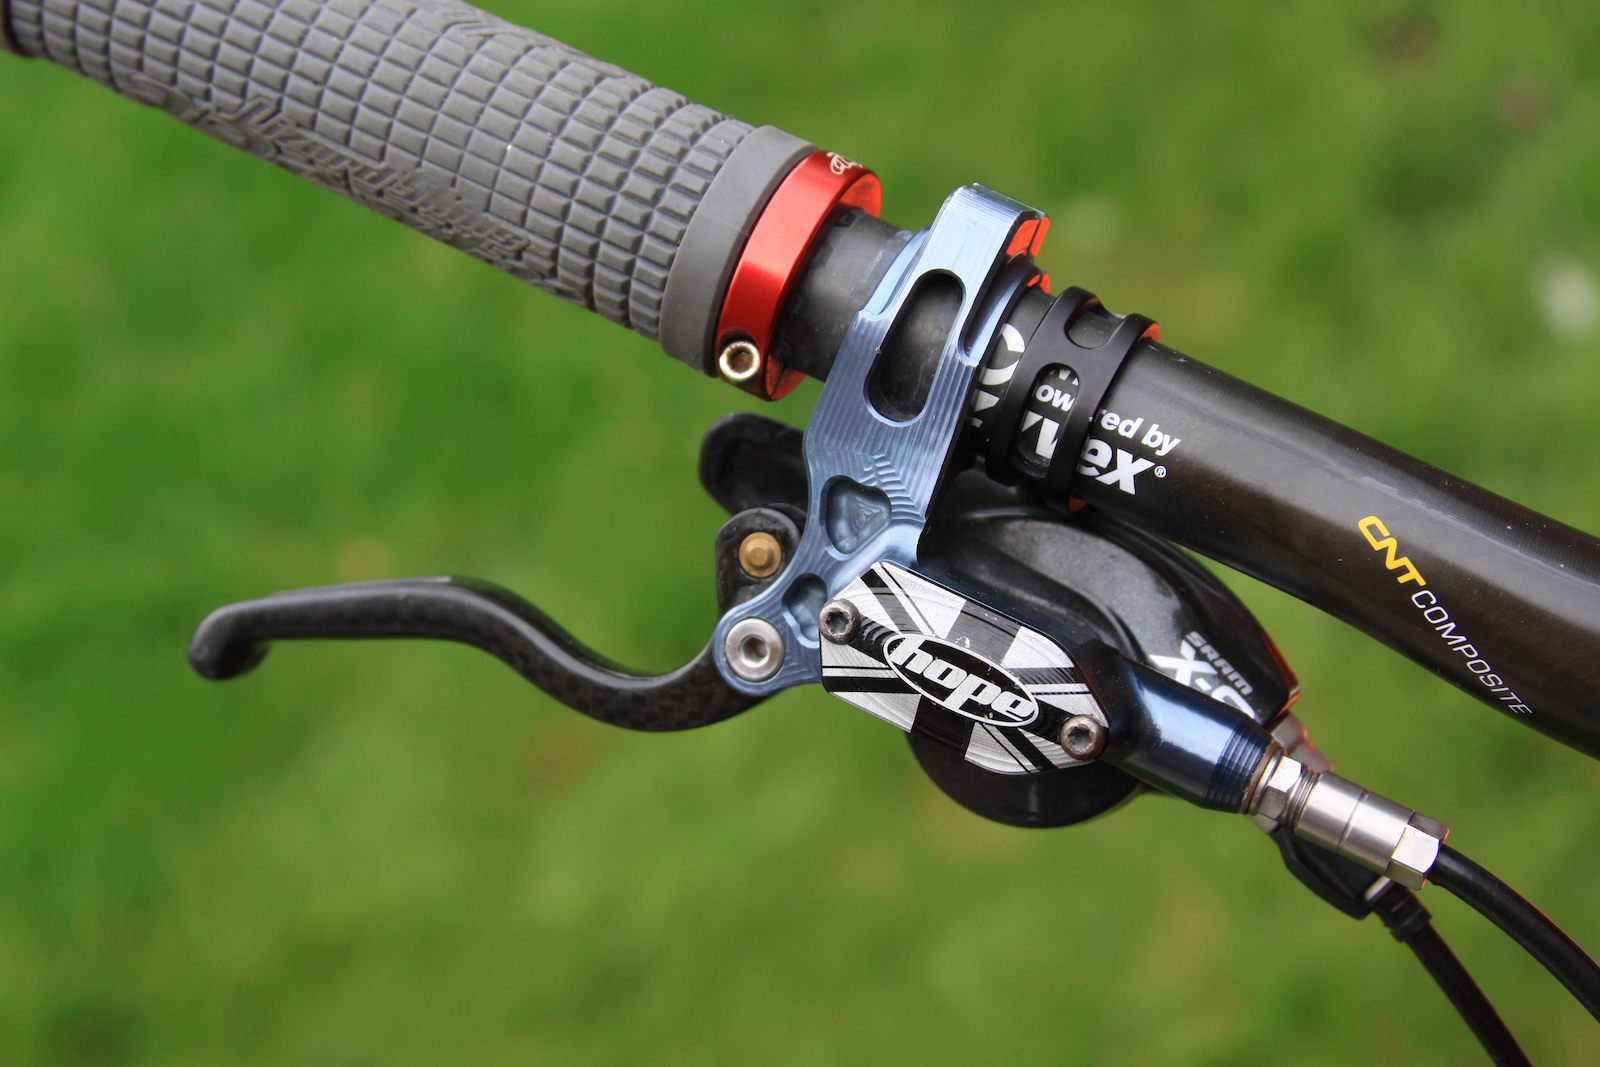 Hope Mini Pro's with Carbon levers